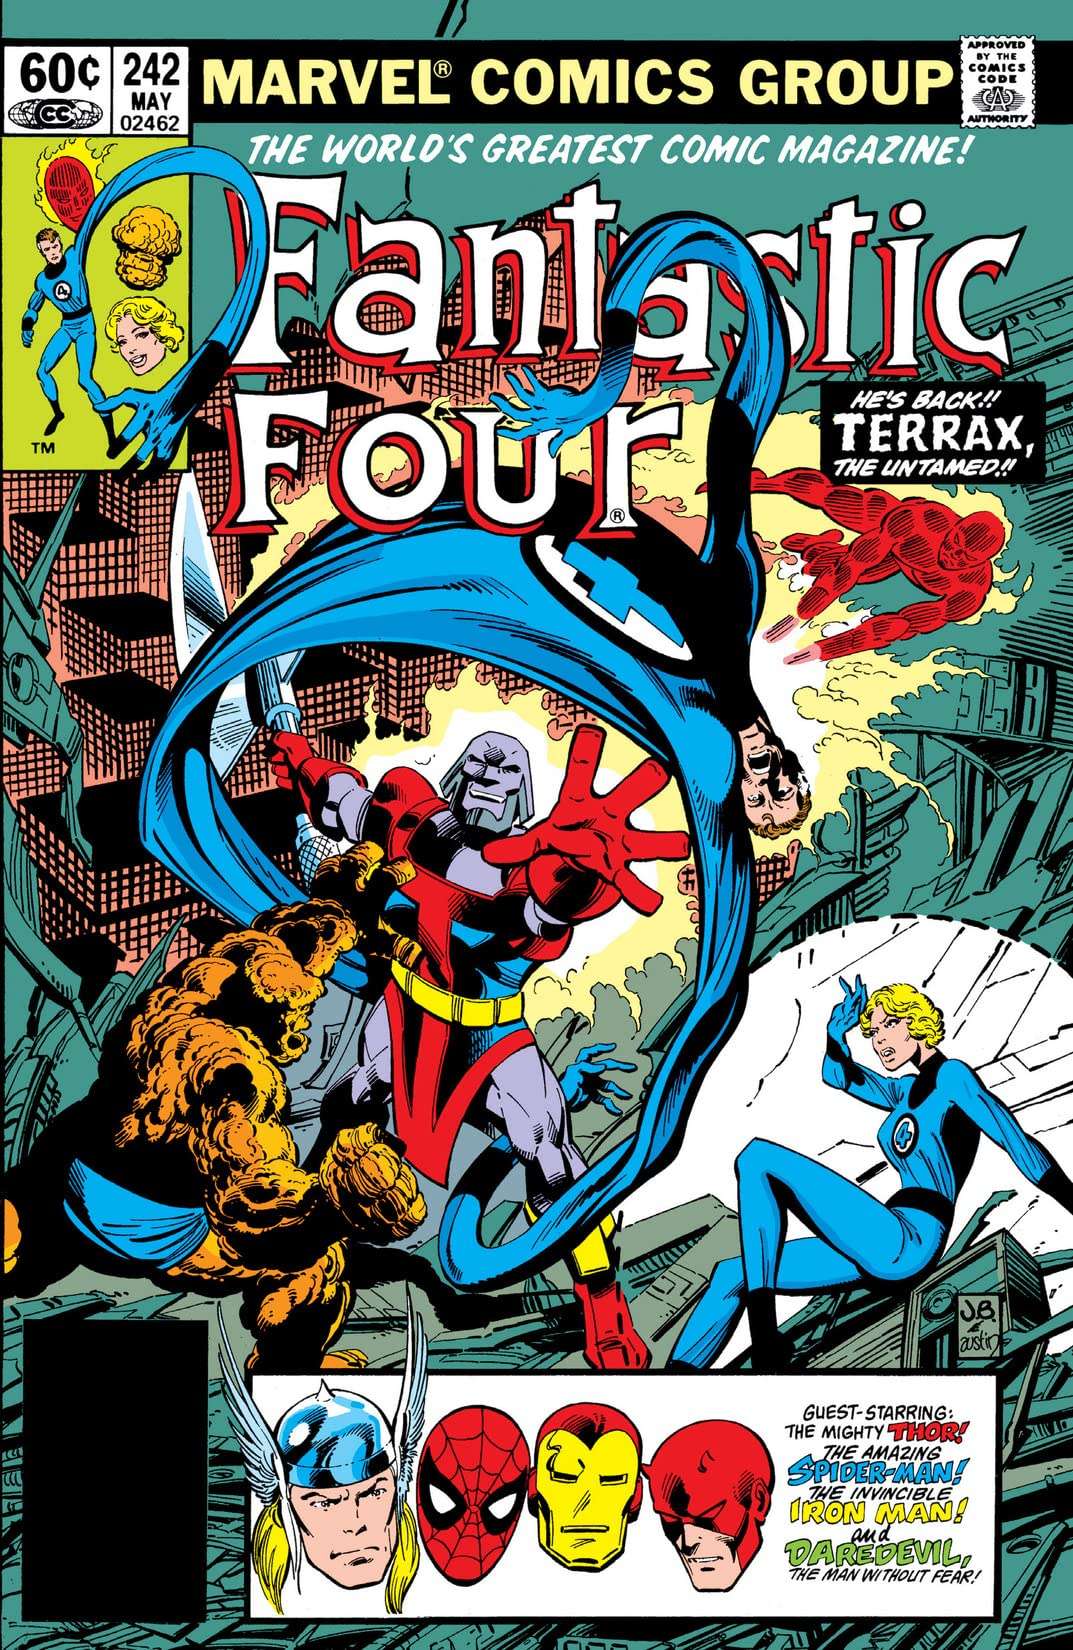 John Byrne Made The Fantastic Four Great Again By Focusing On The